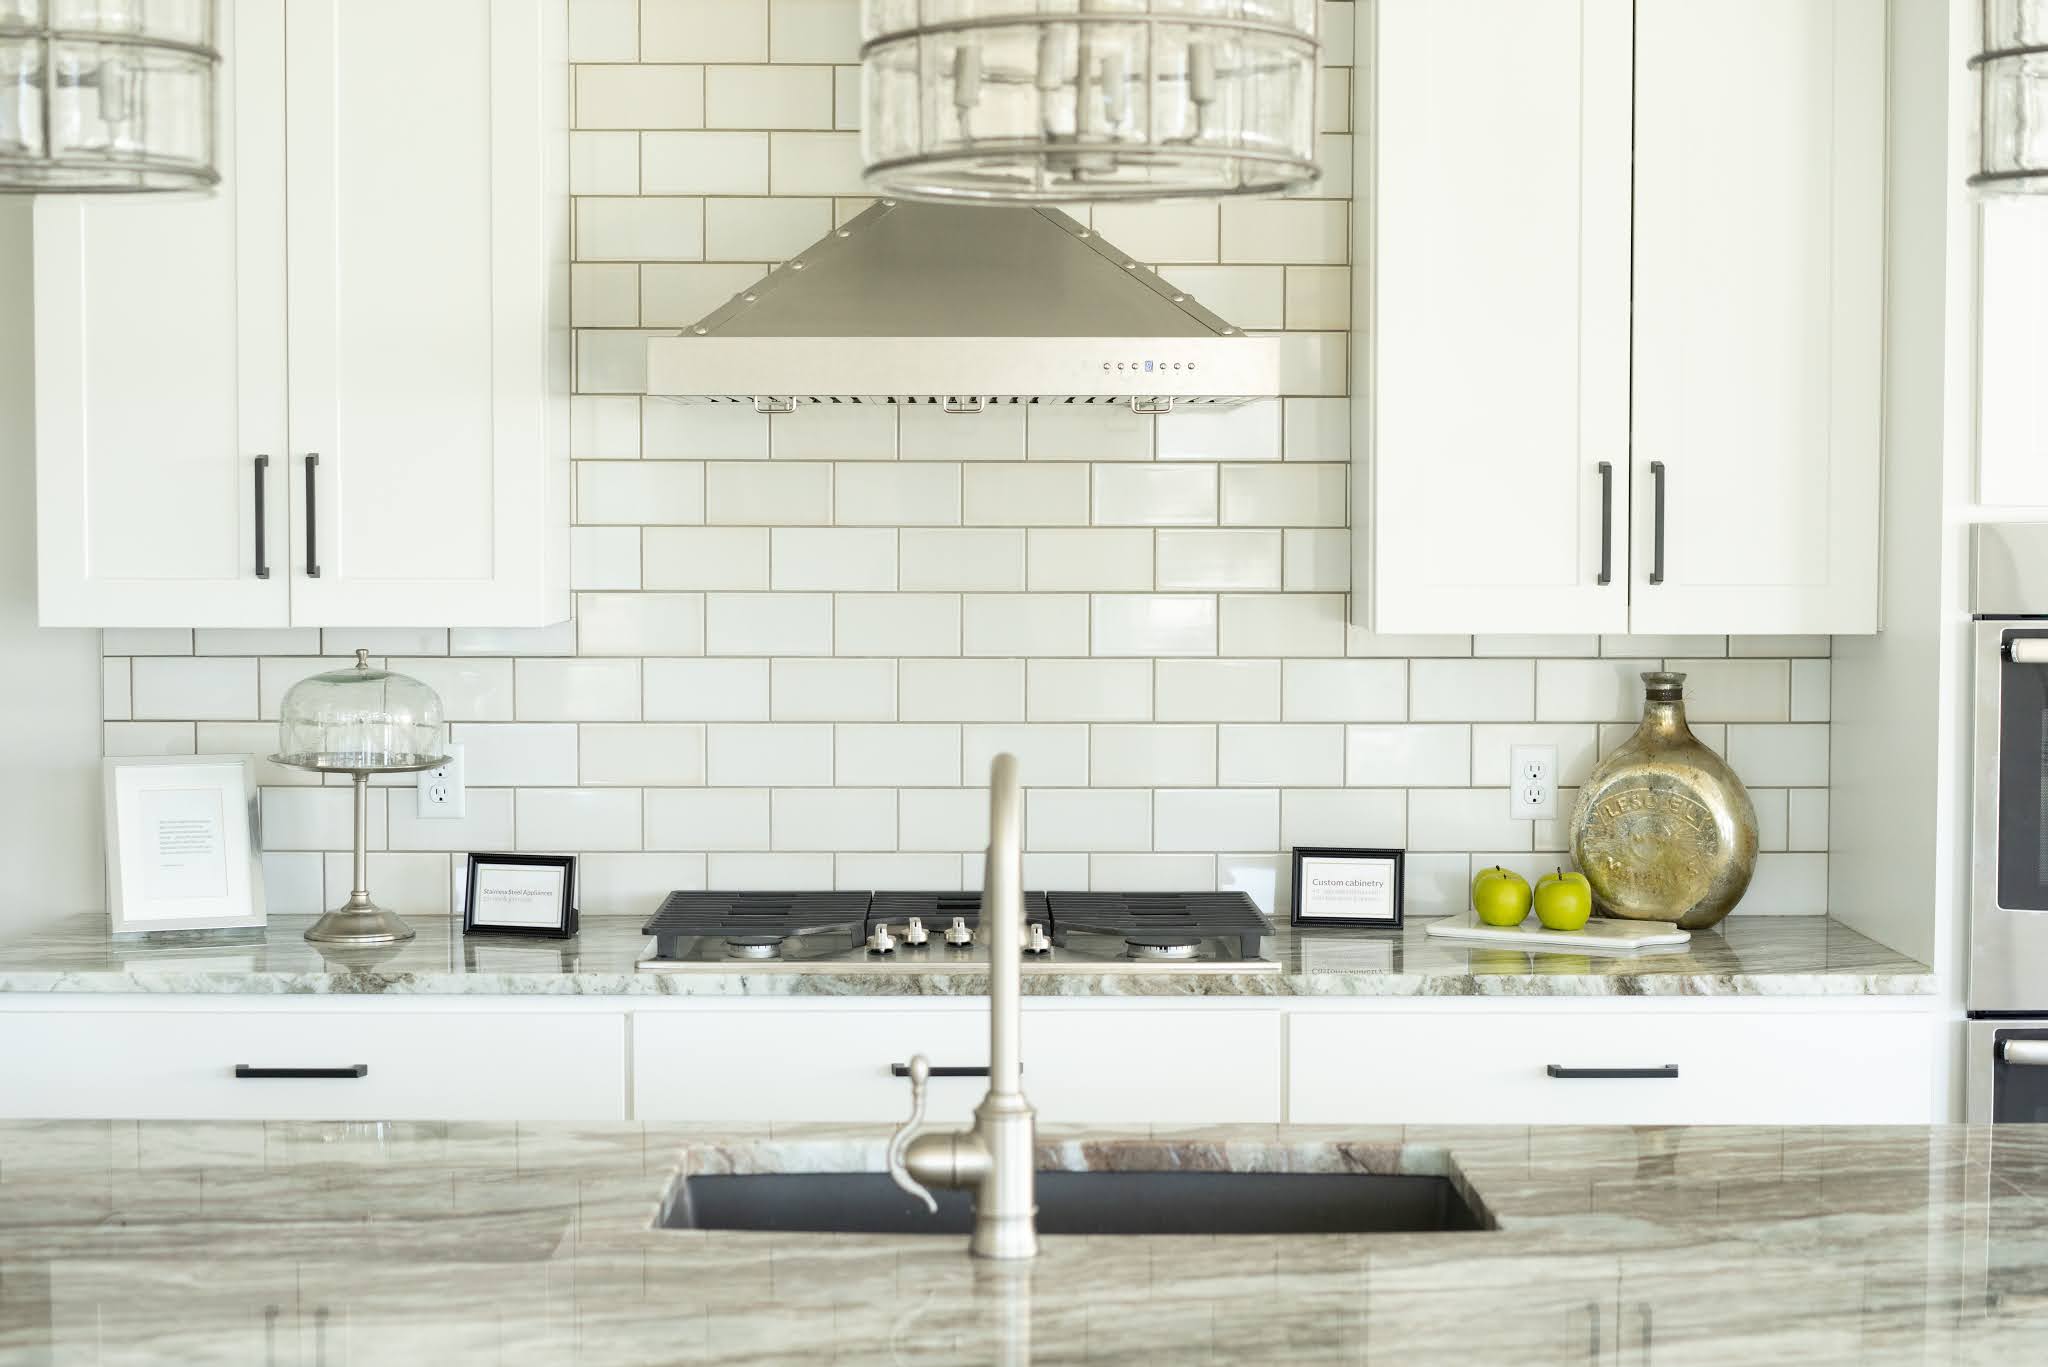 A tile backsplash is one way to add rhythm and repetition